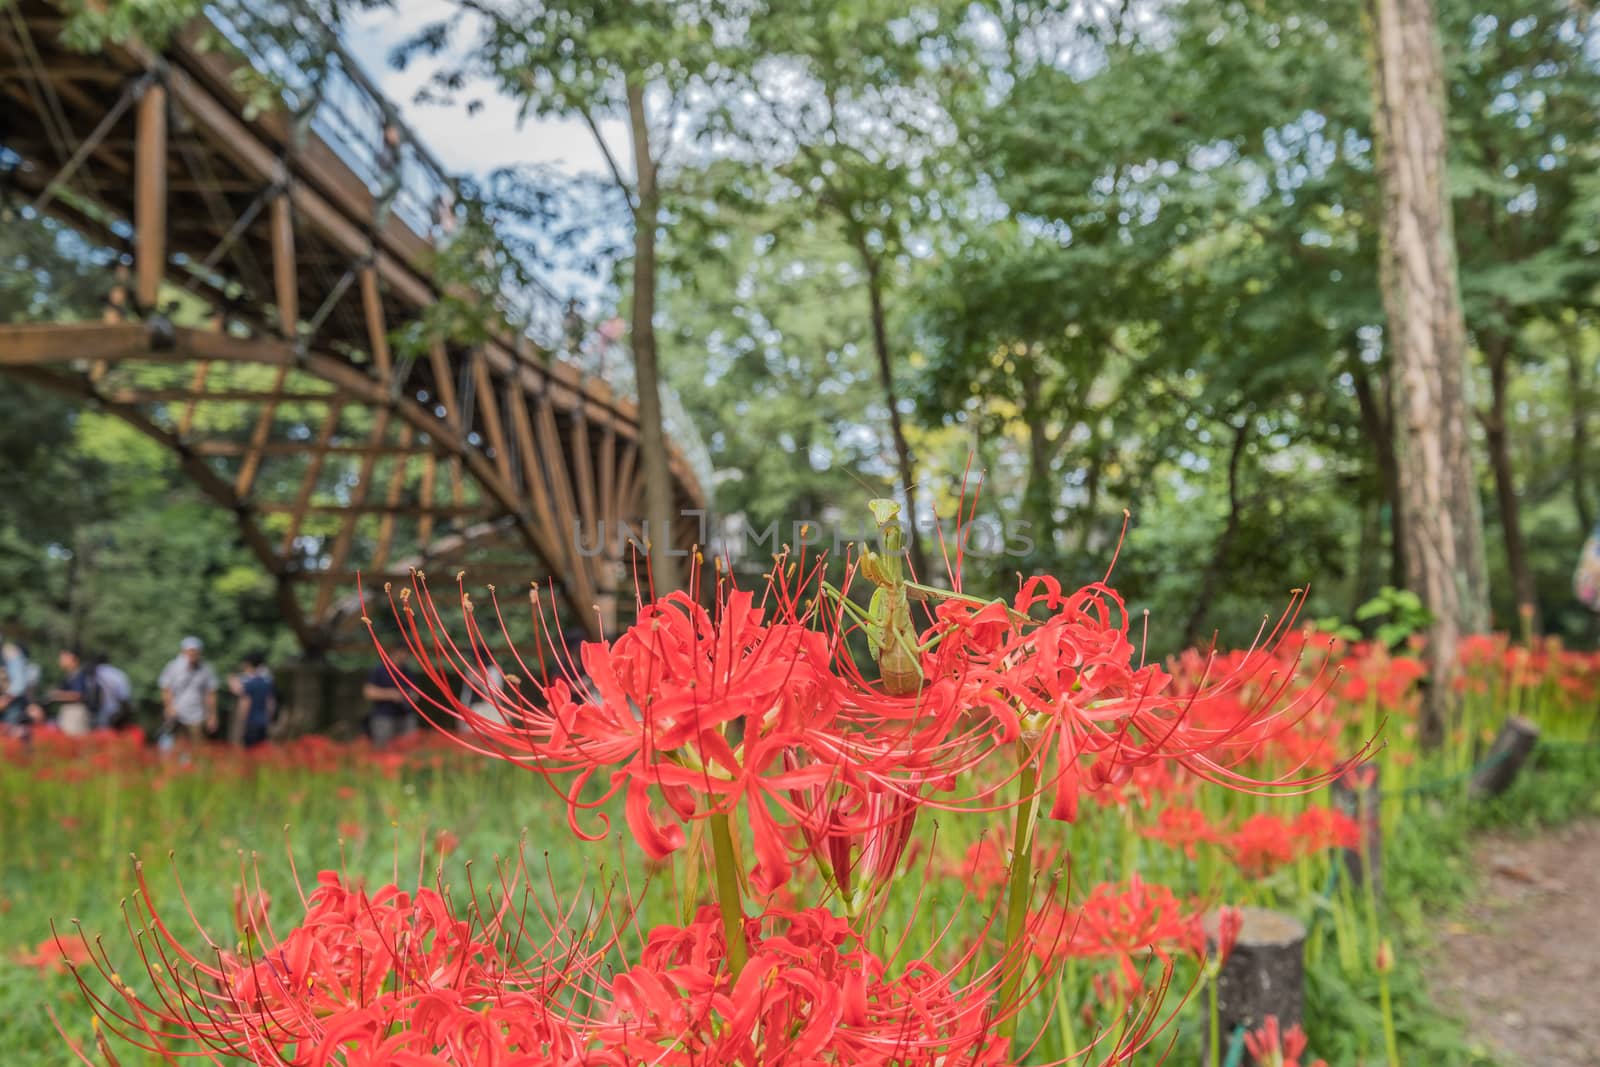 RED SPIDER LILY by jaruncha